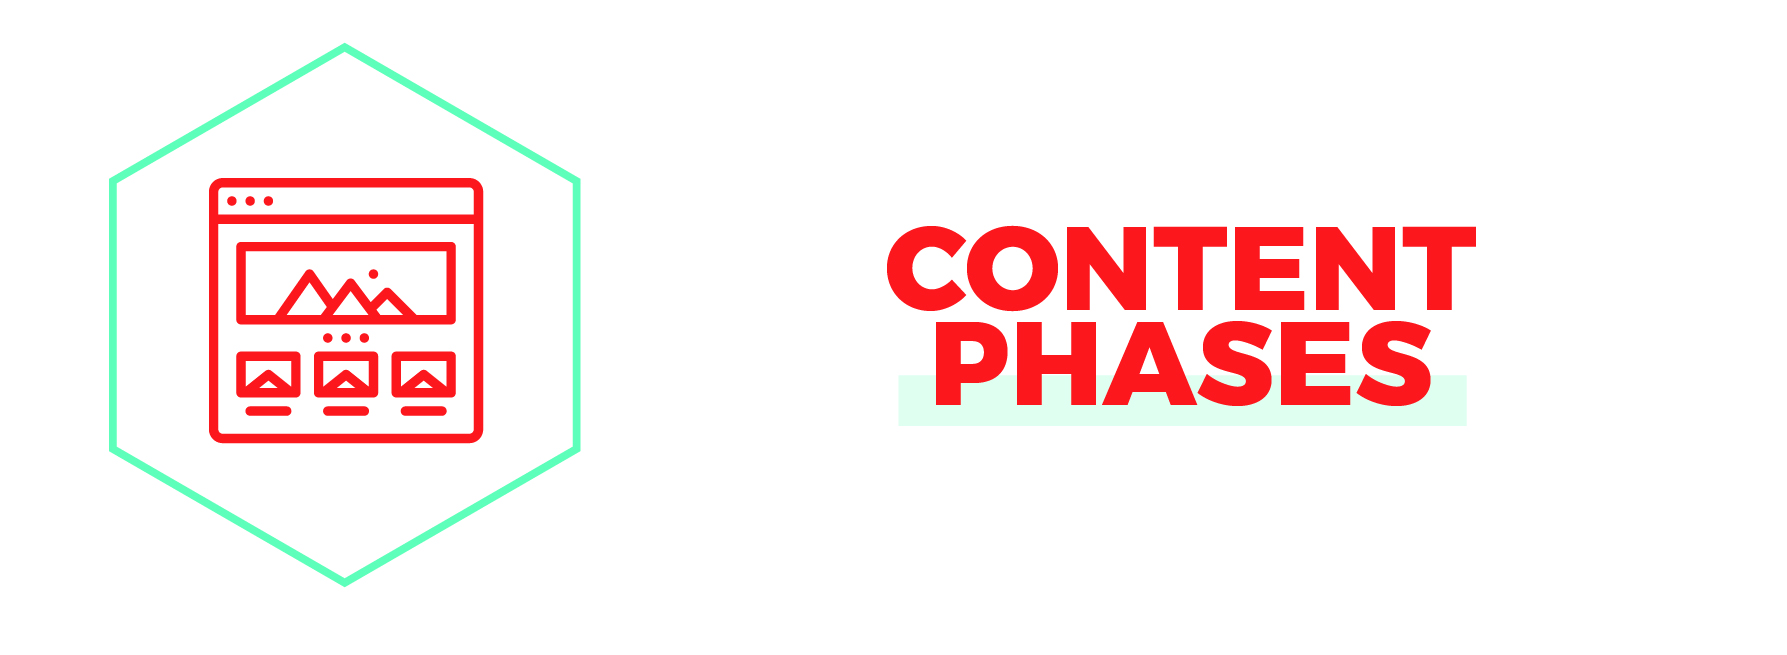 content phases